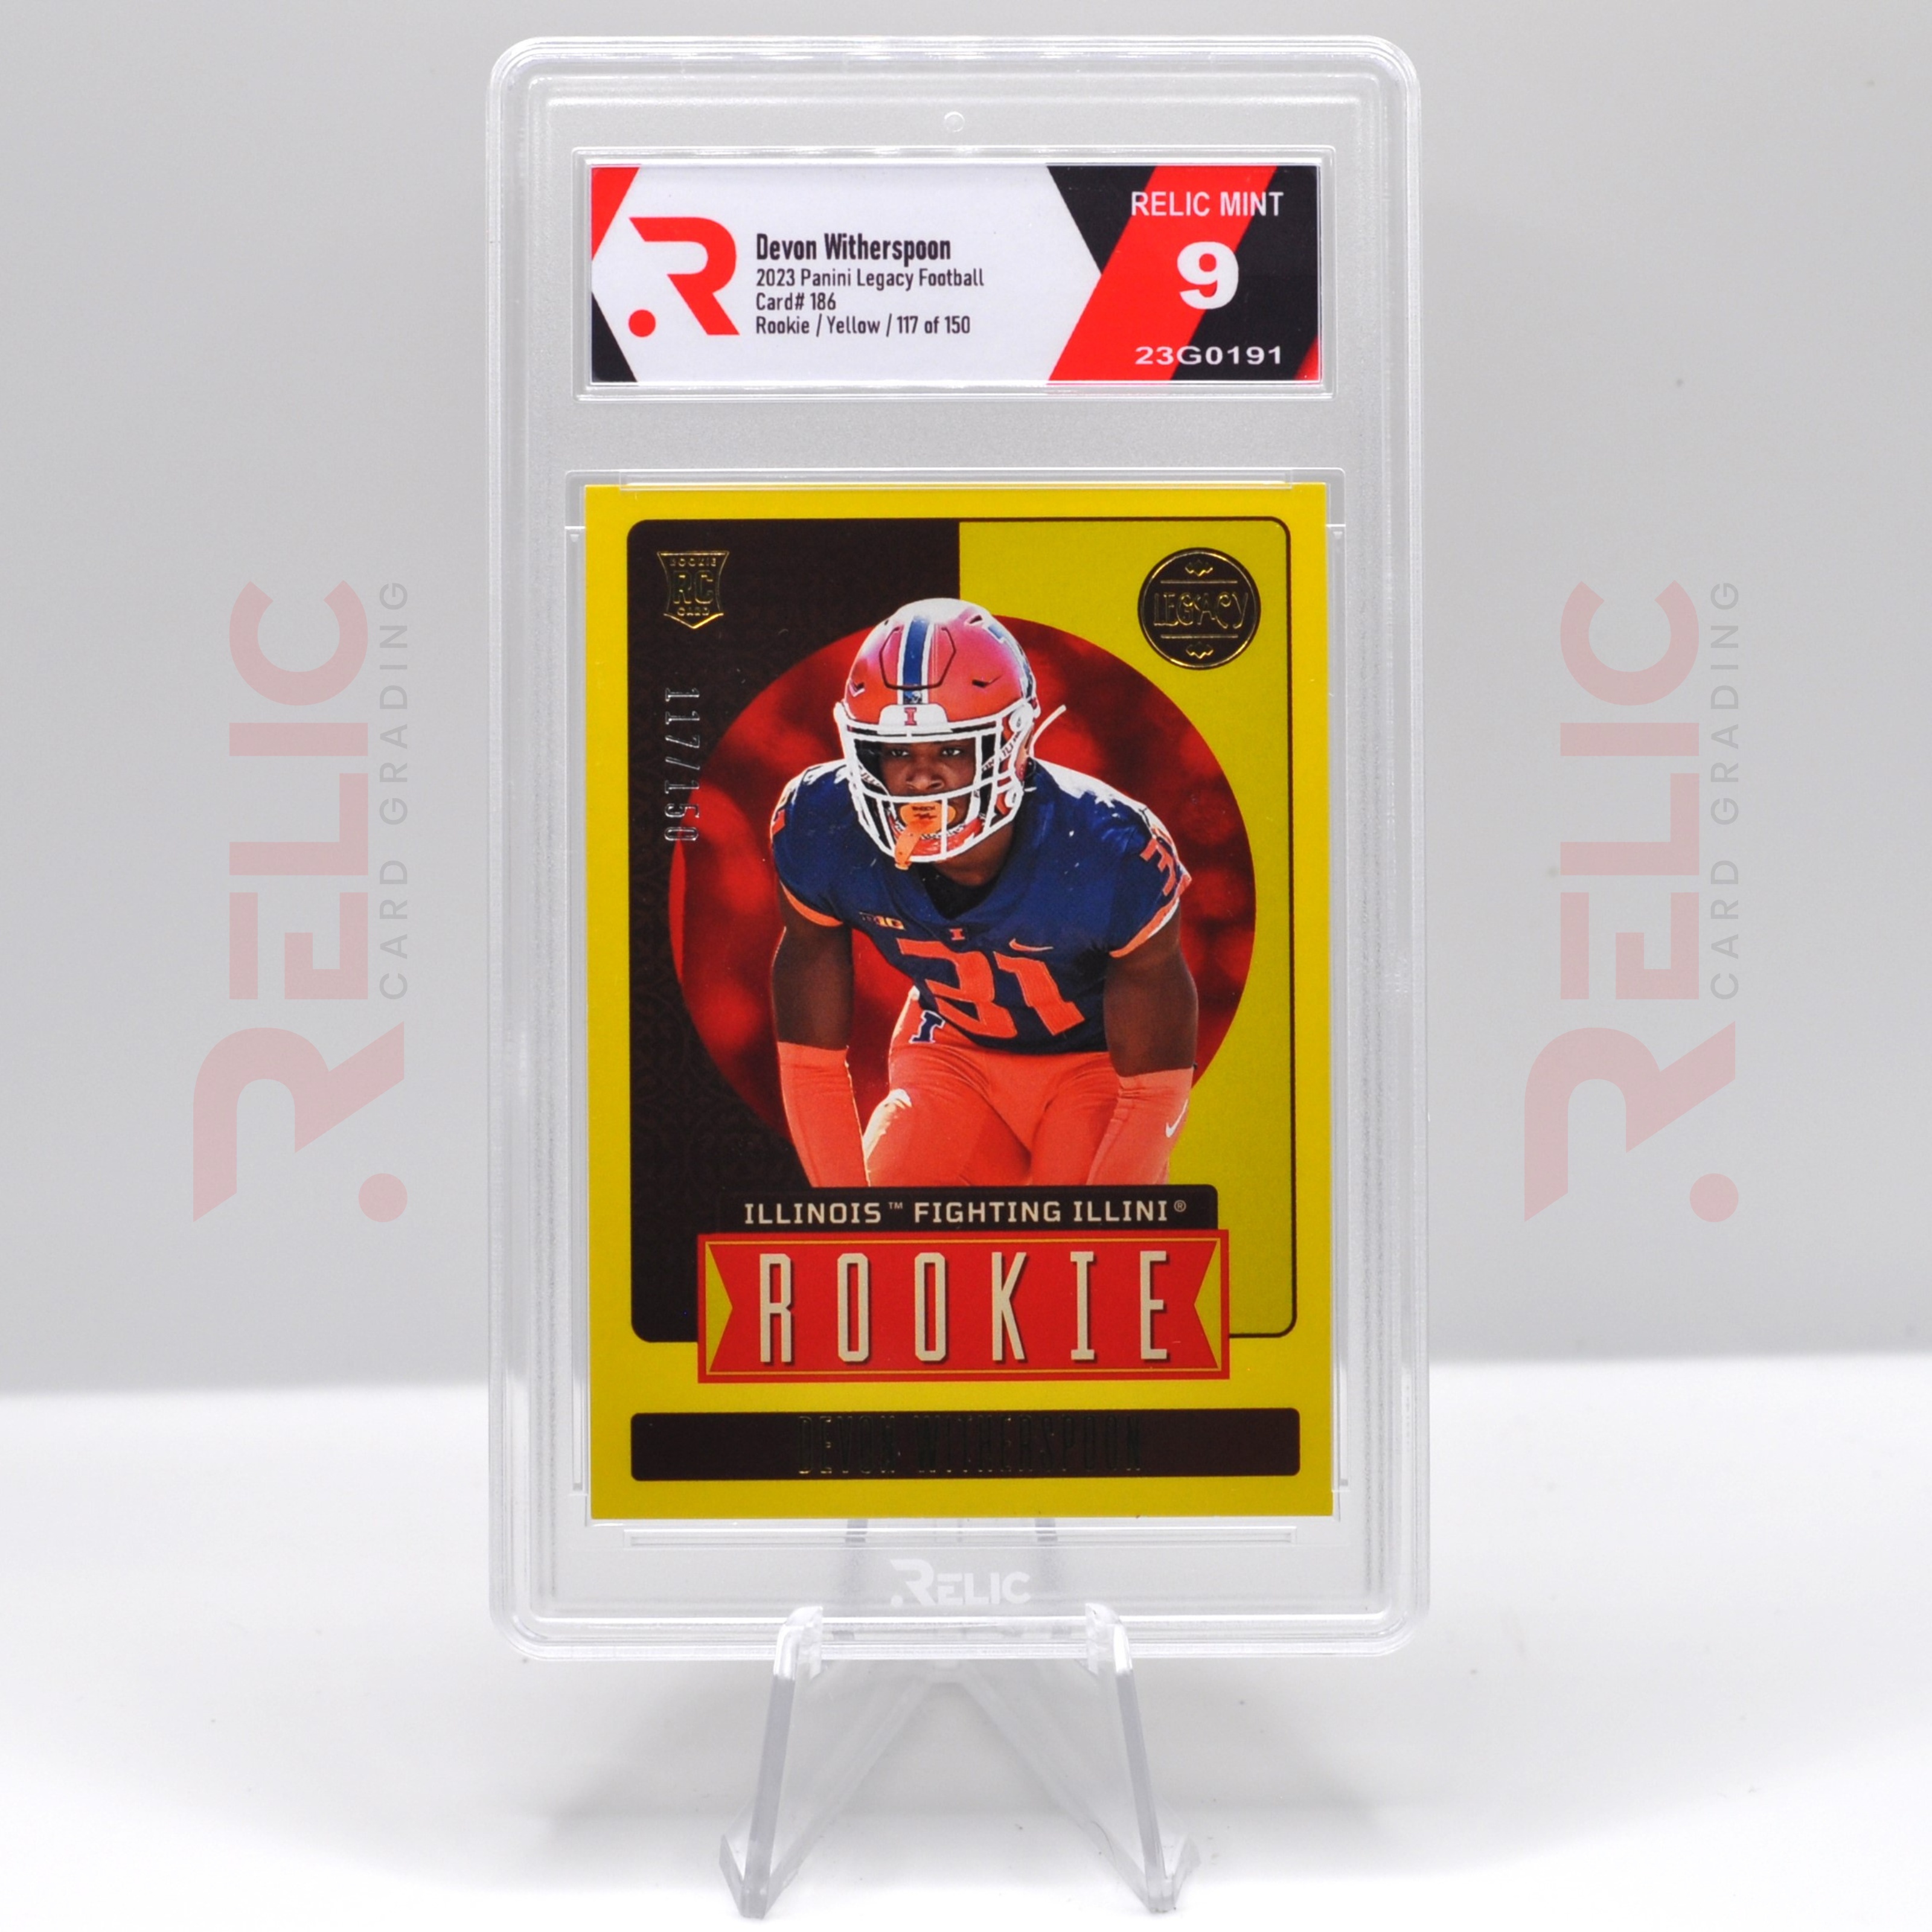 Devon Witherspoon 2023 Panini Legacy Football Graded Card